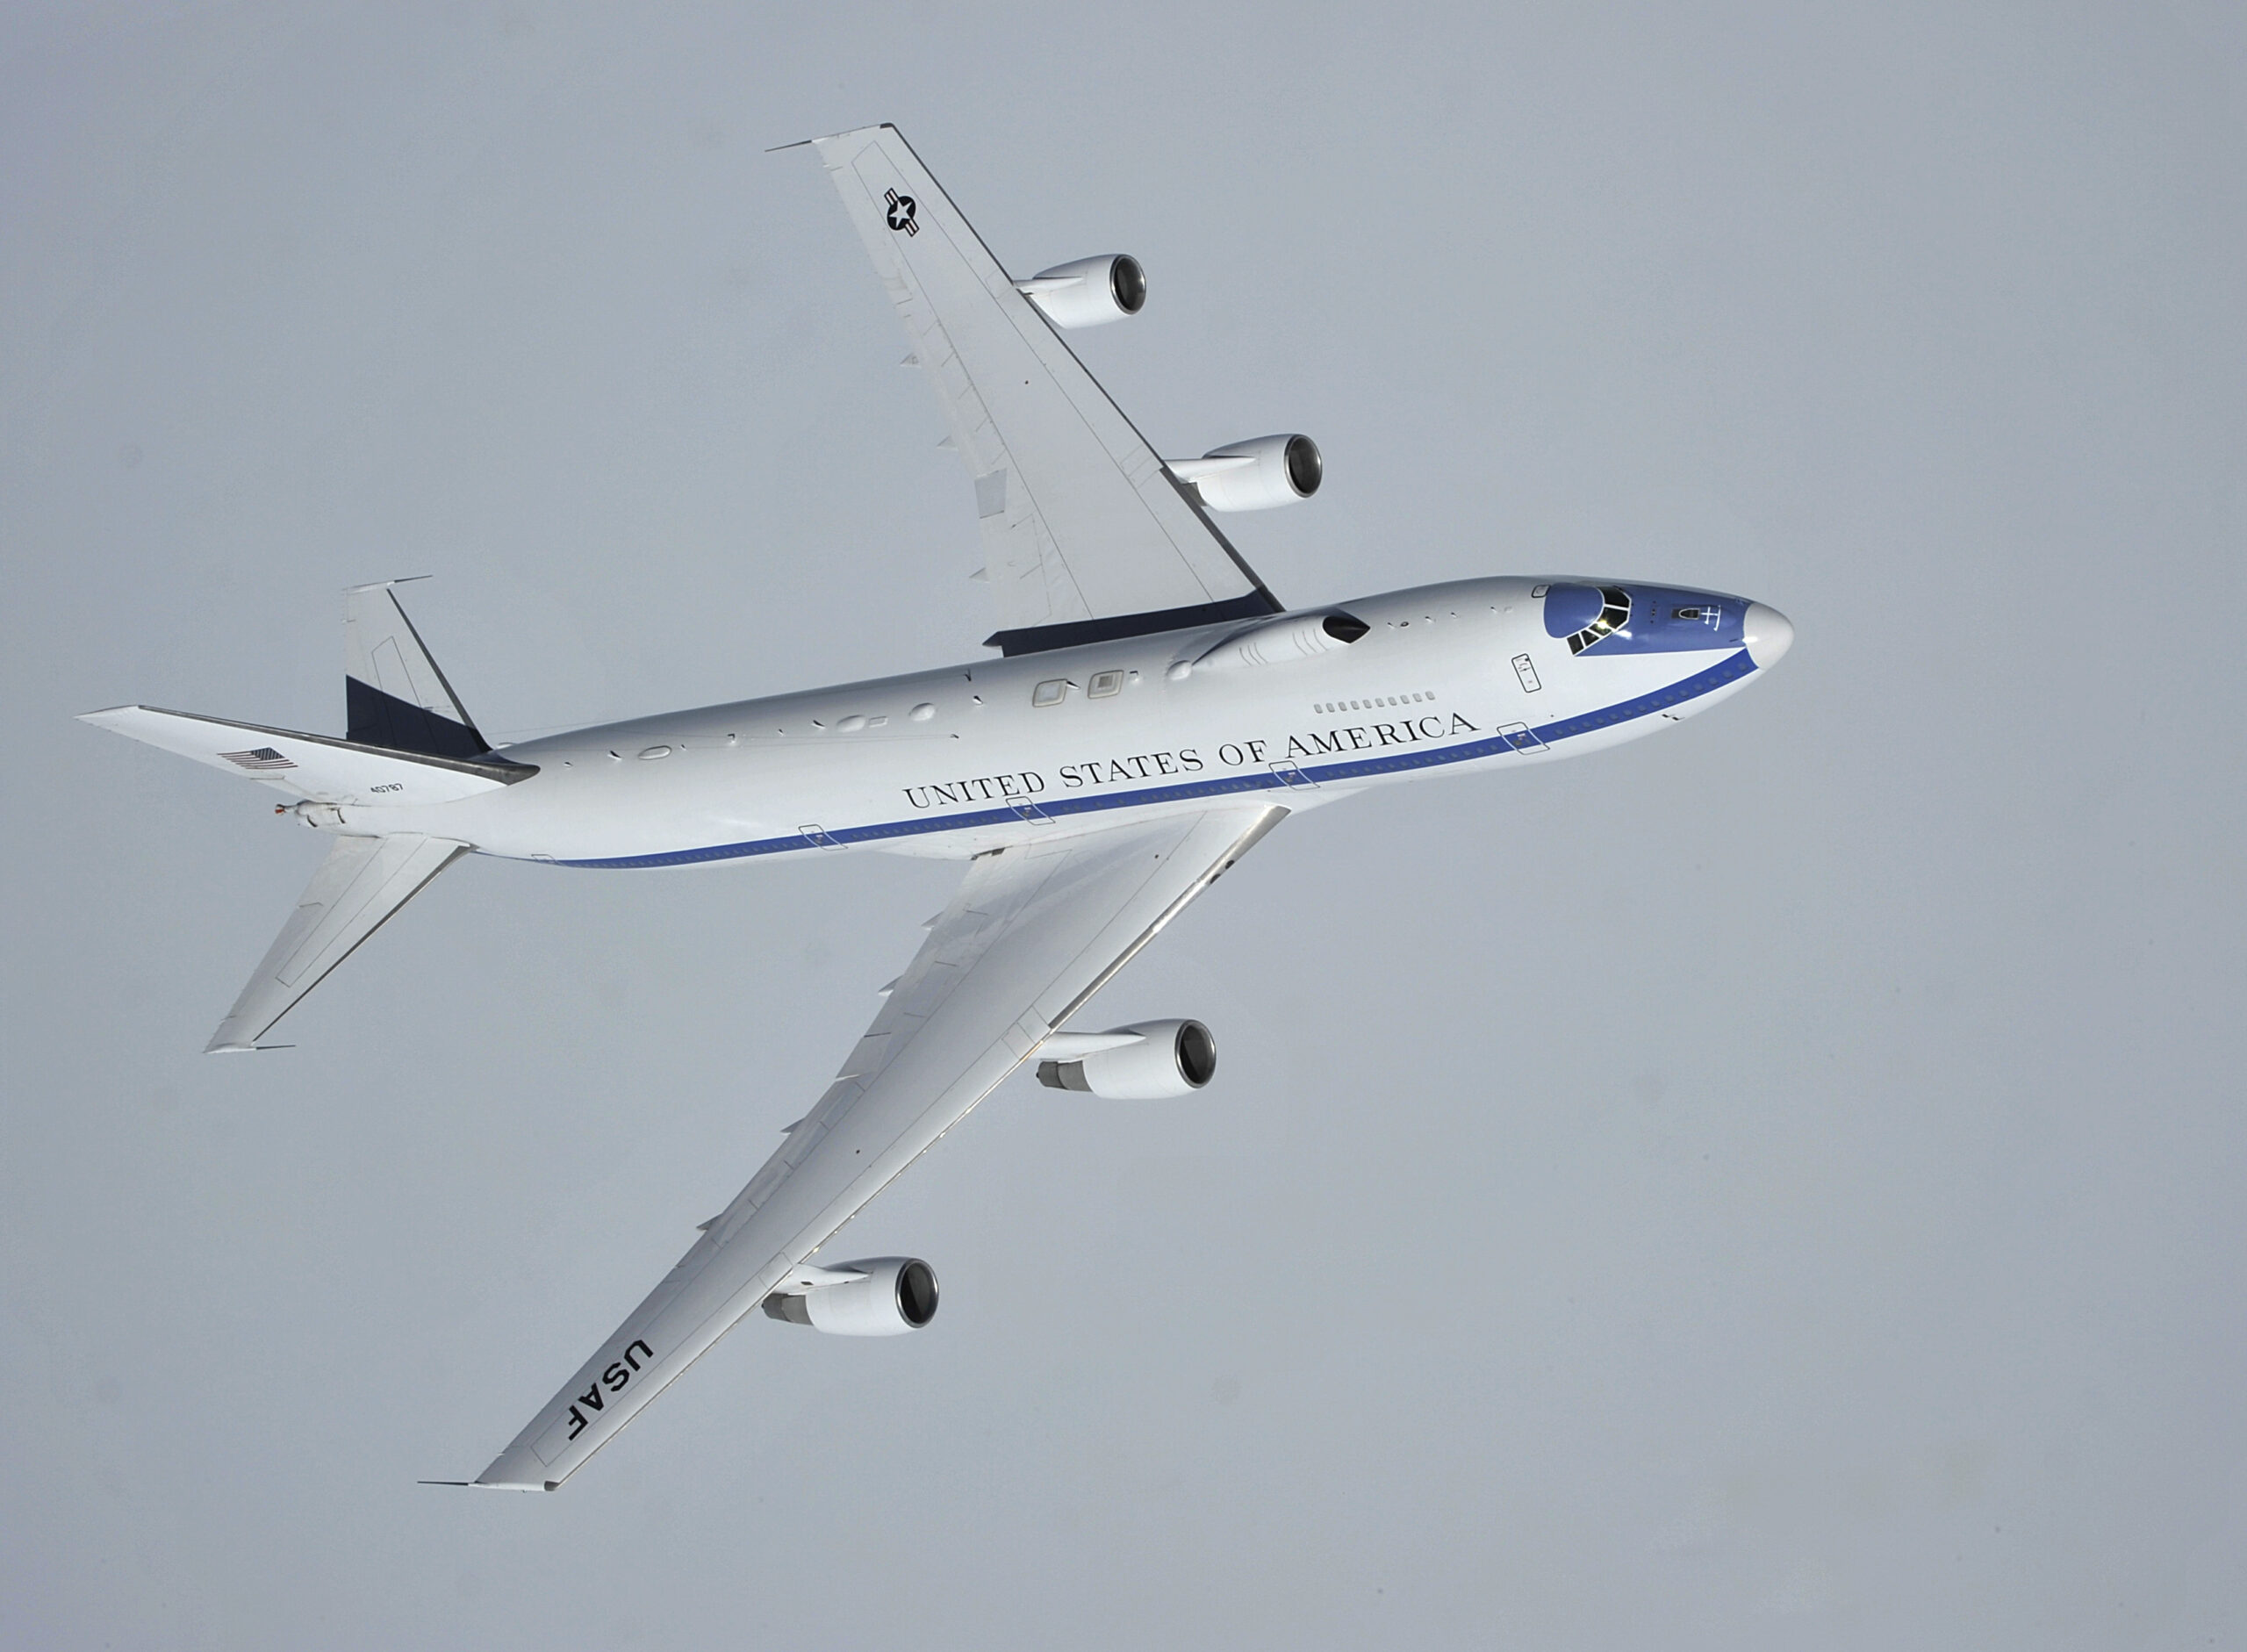 An Air Force E-4B flies over the Canadian Pacific Coast on April 10, 2014. This shot gives us a good look at the E-4's spine, which is festooned with antennas. (U.S. Air Force photo by Senior Airman Mary O'Dell)